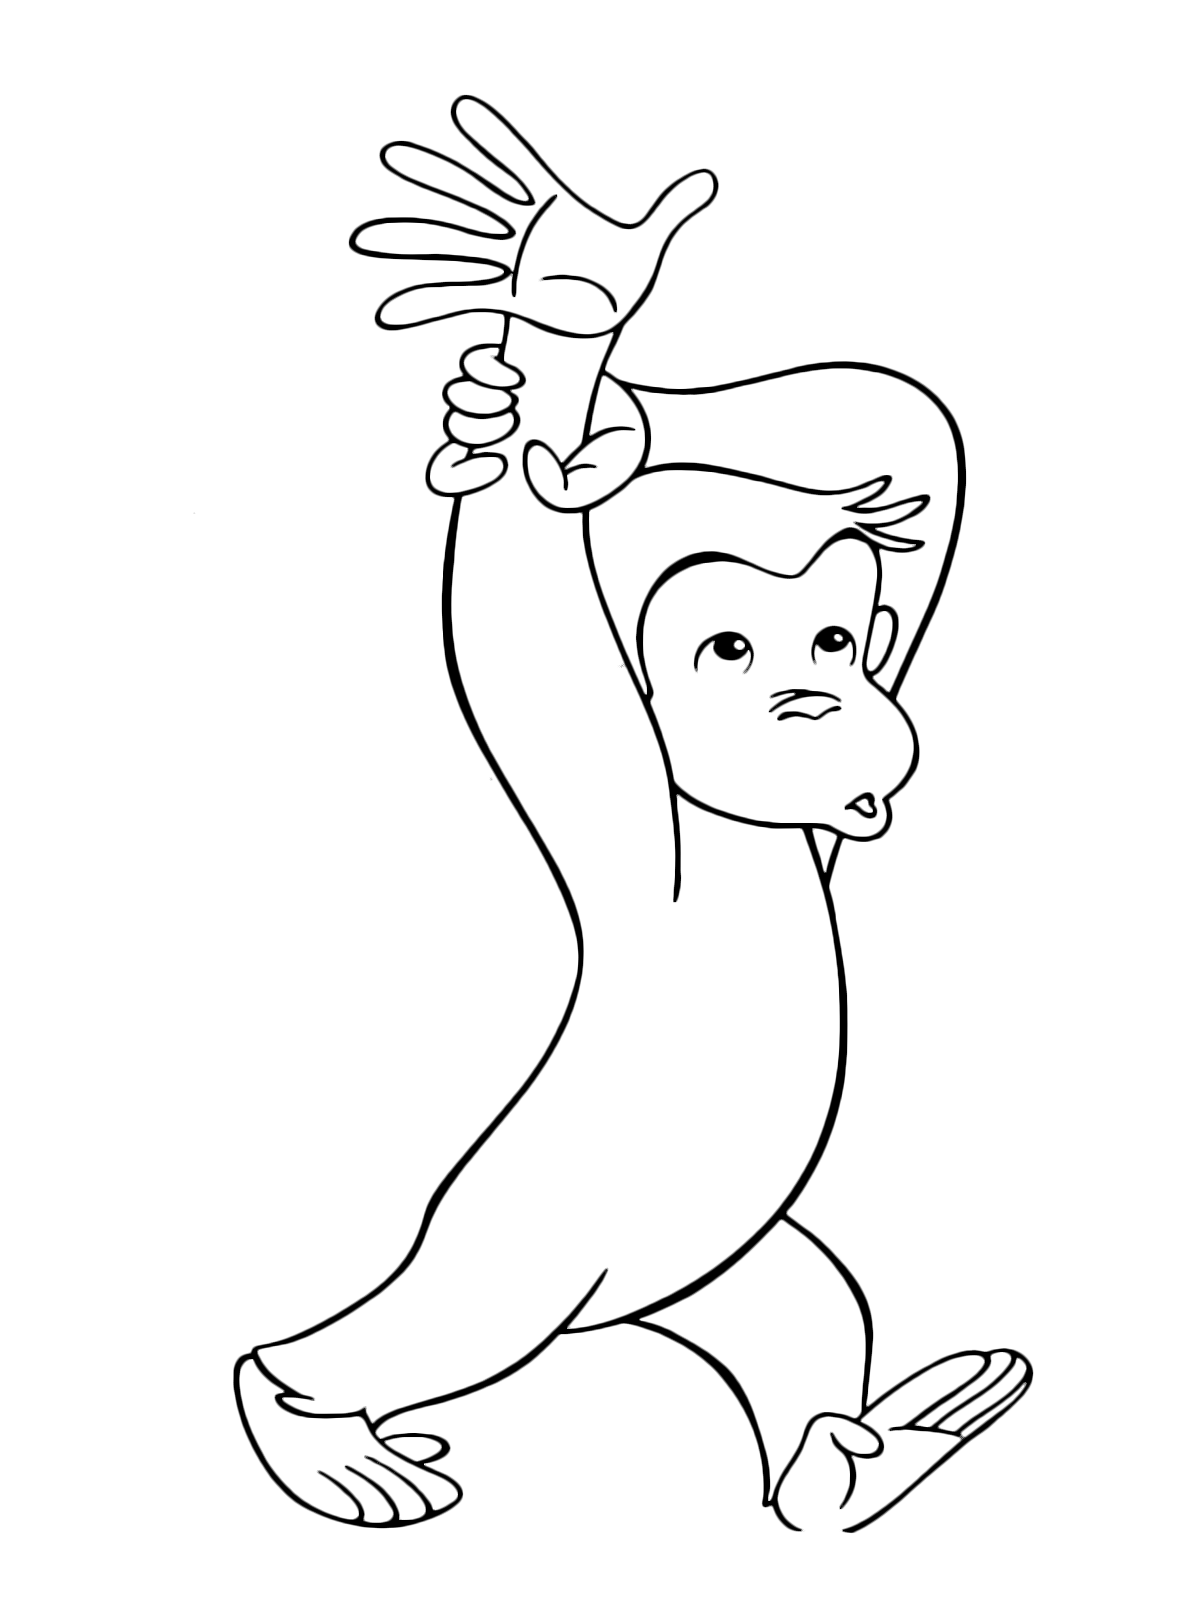 Curious George - George stretches an arm